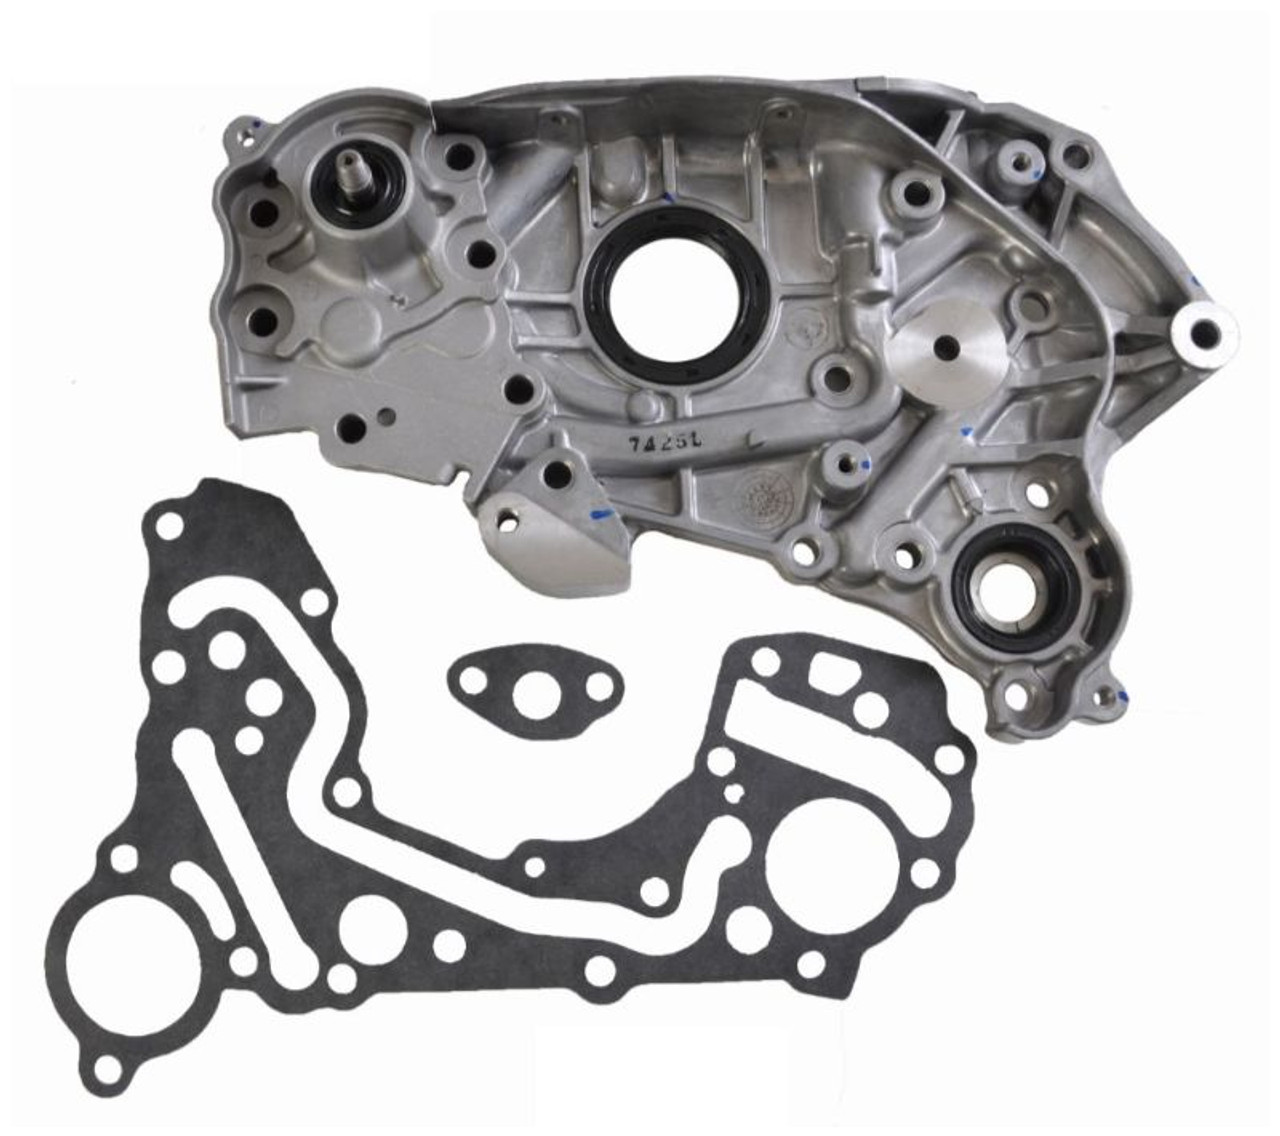 1991 Plymouth Laser 1.8L Engine Oil Pump EP087 -4